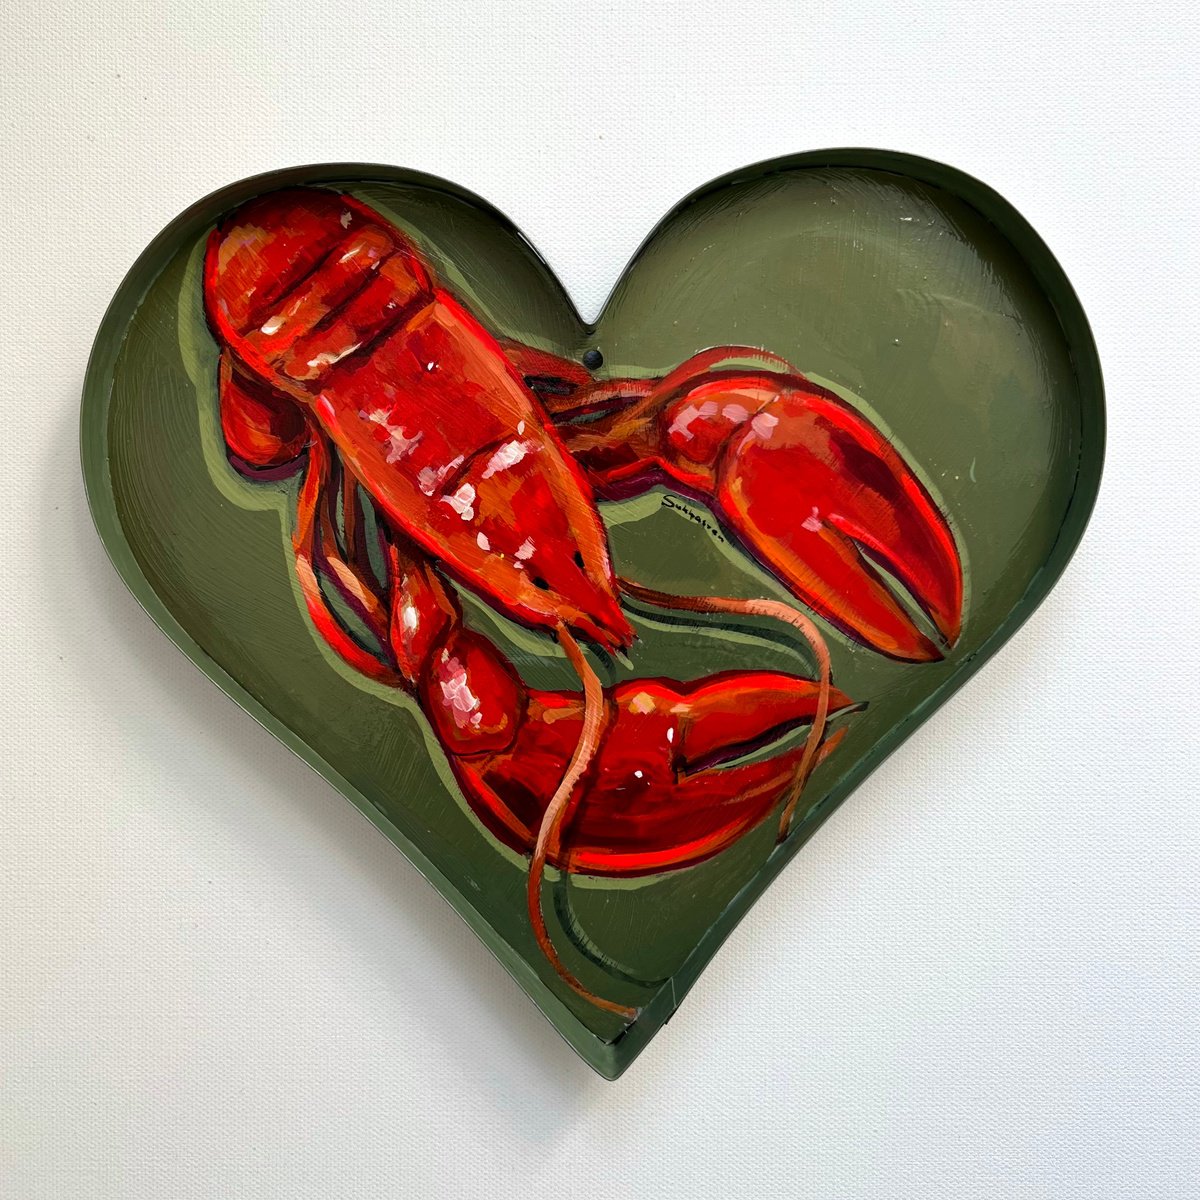 Still Life with Lobster by Victoria Sukhasyan